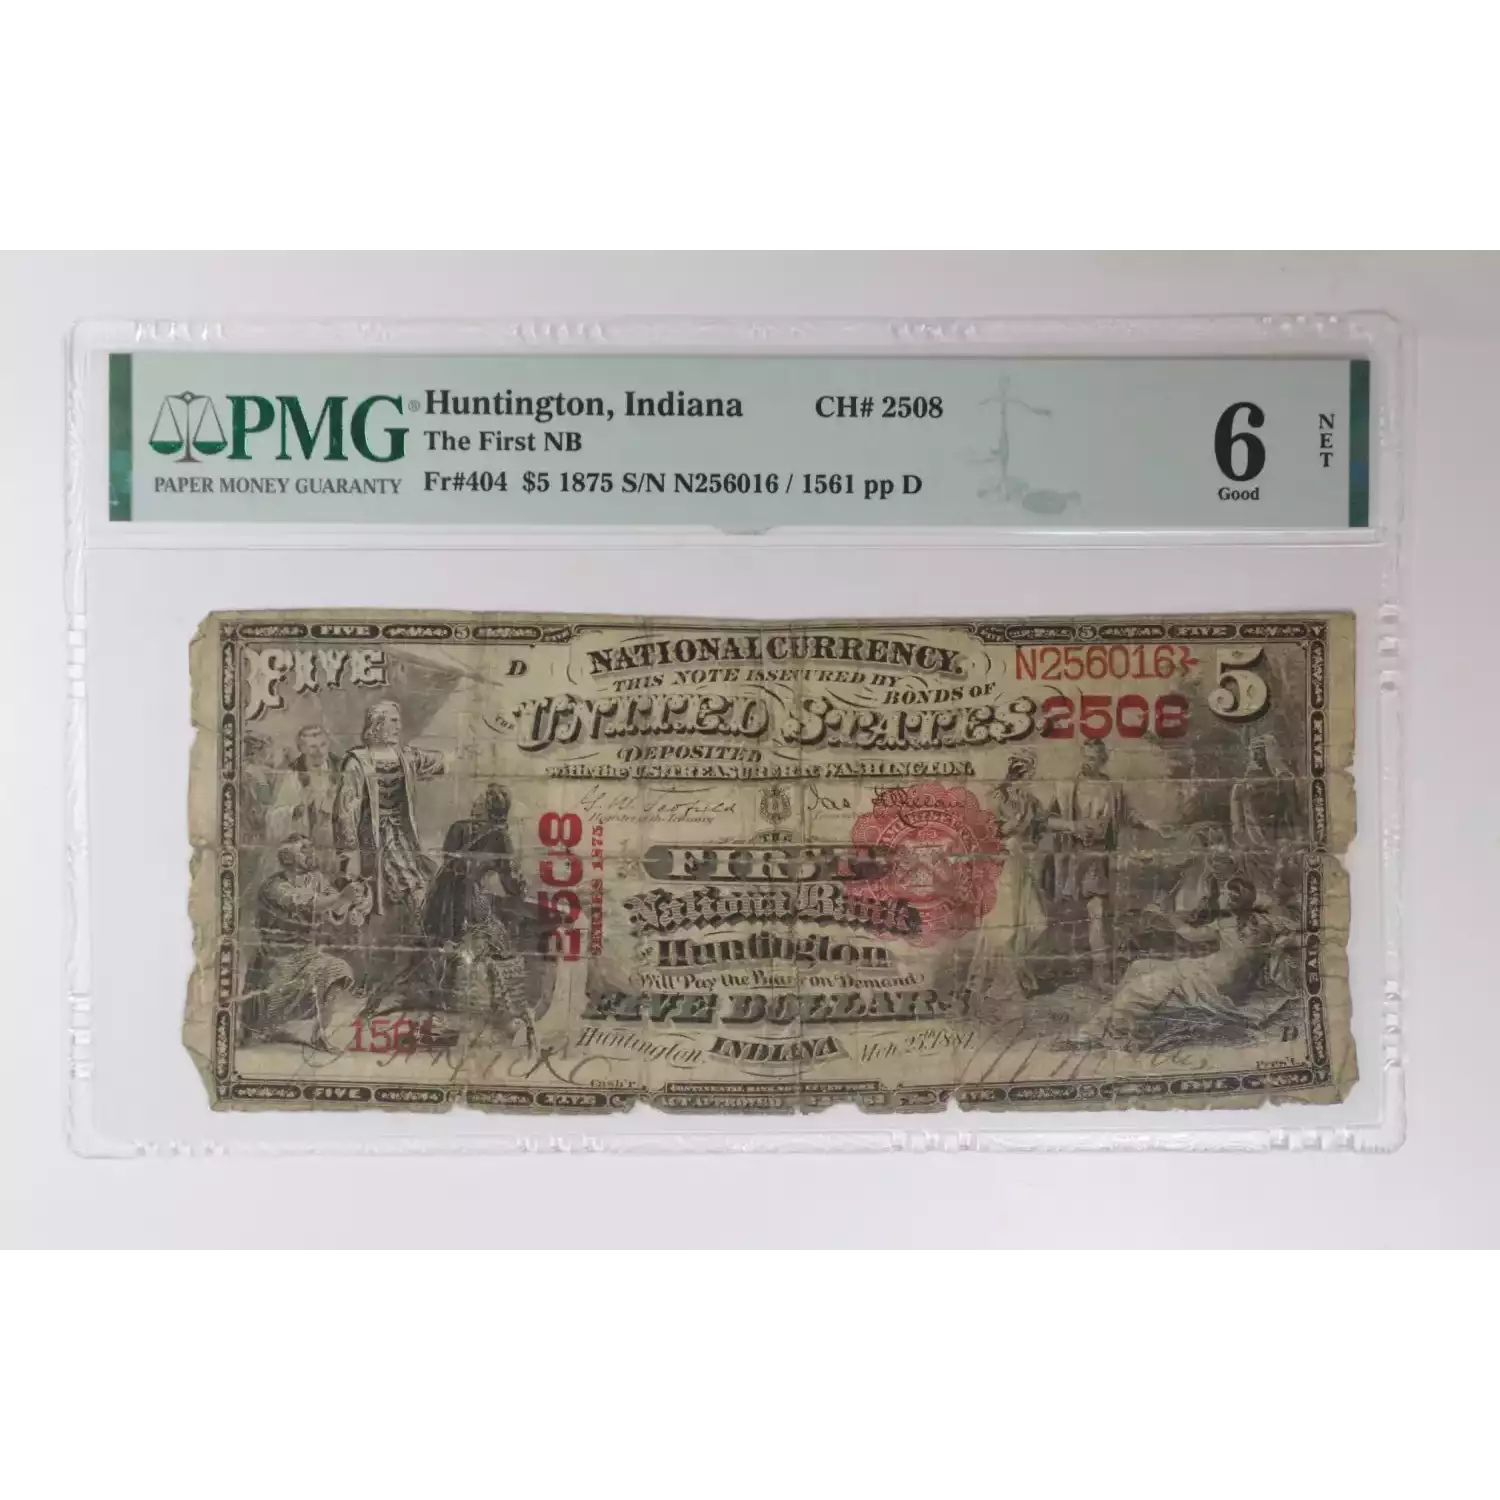 Large Size National Note